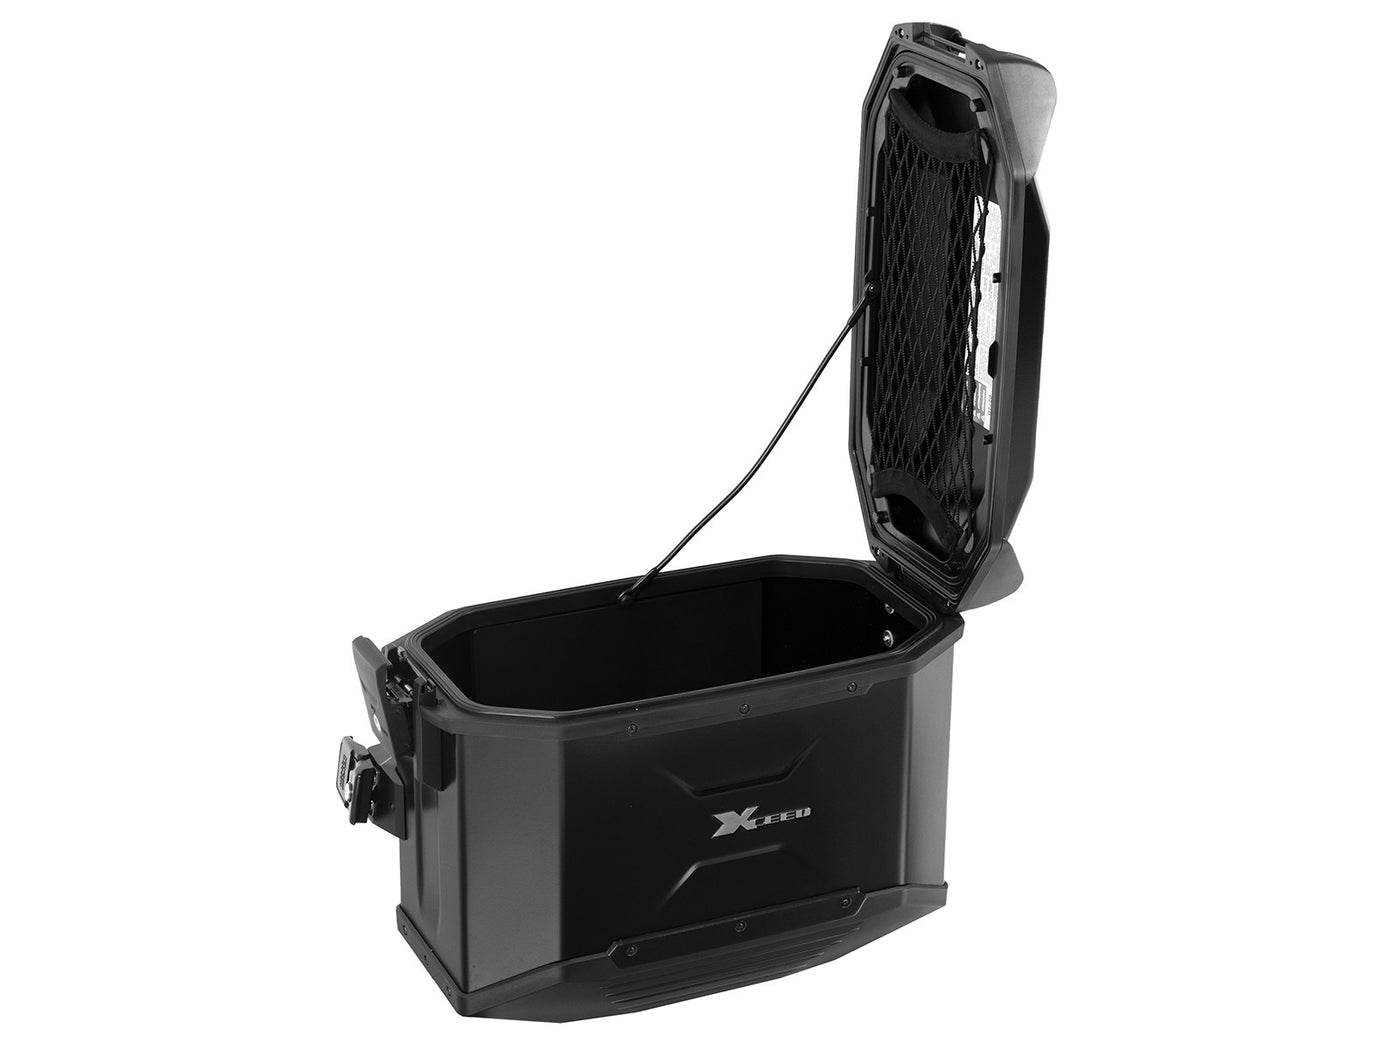 XCEED Right Sidecase 38 - Black